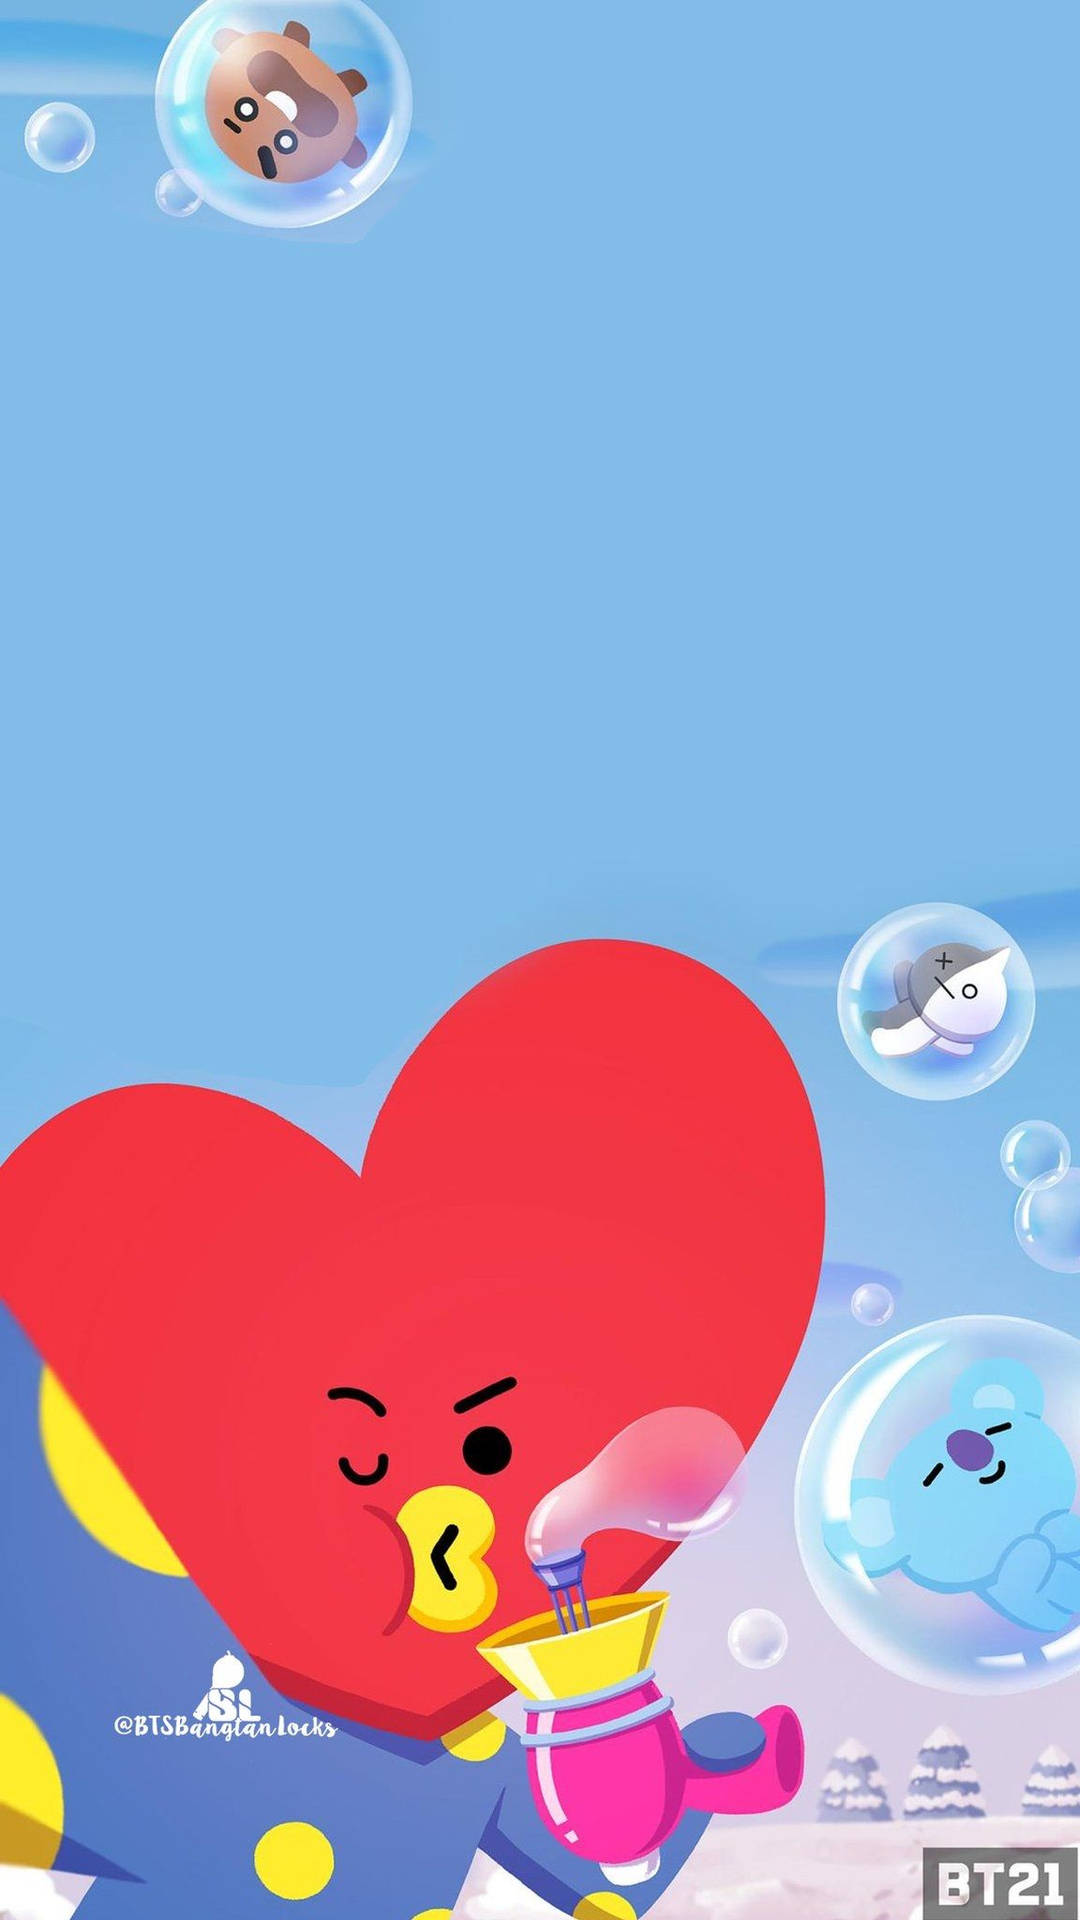 Bt21 Tata Blowing Bubbles Background